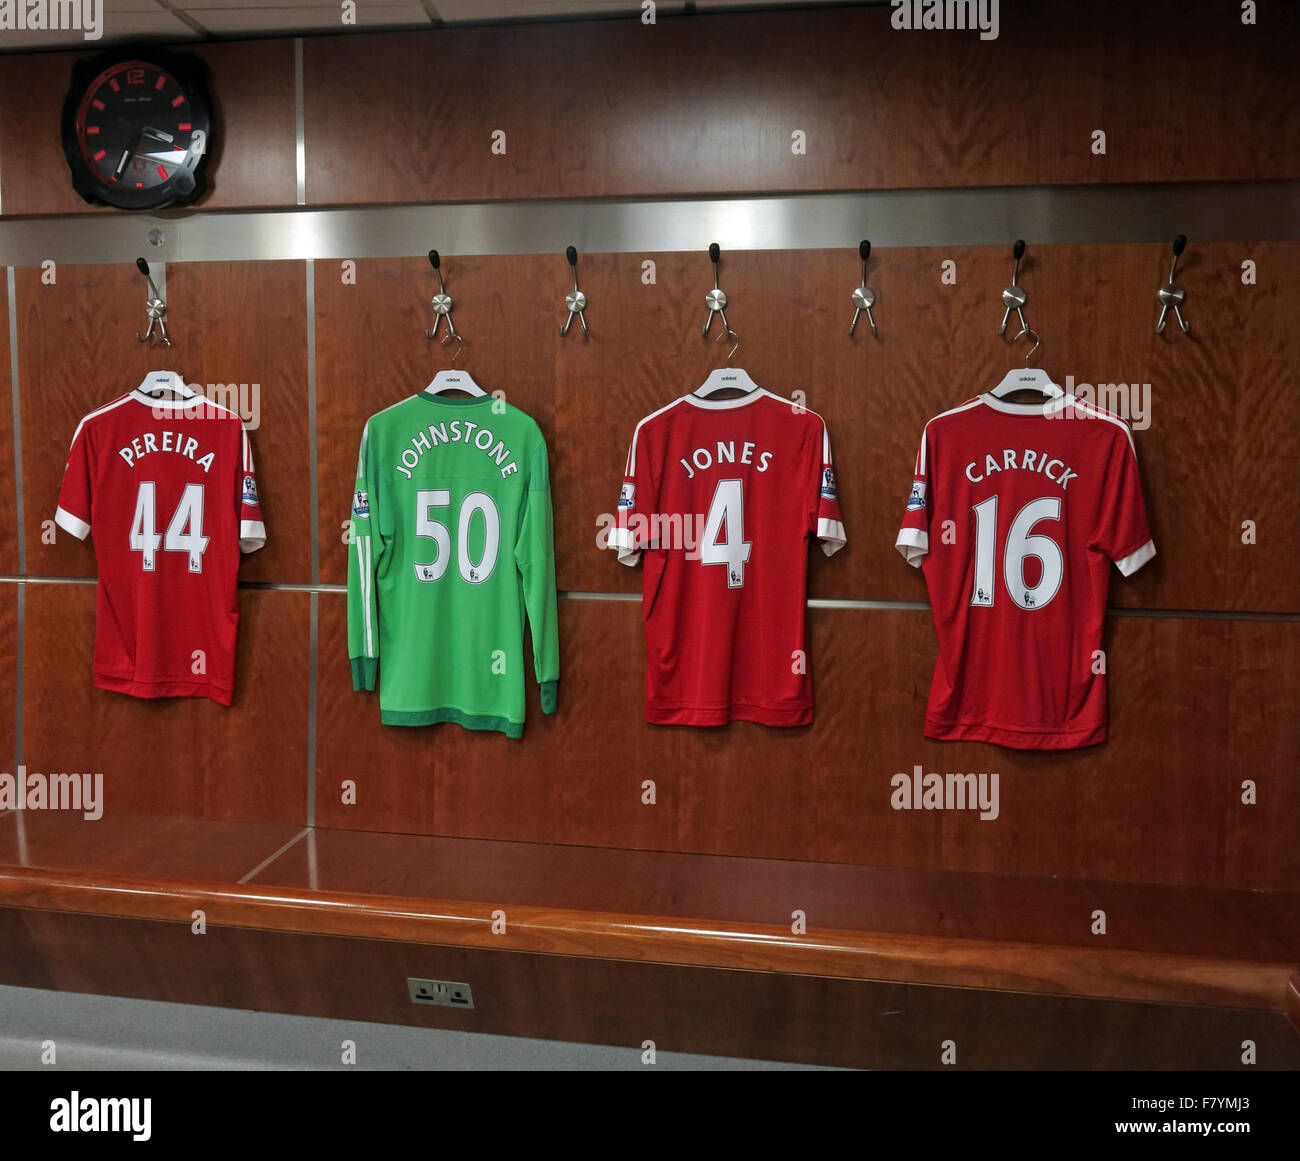 Mix of MUFC shirts hanging up in MUFC dressing room, with MUFC clock, Old Trafford, Manchester Stock Photo